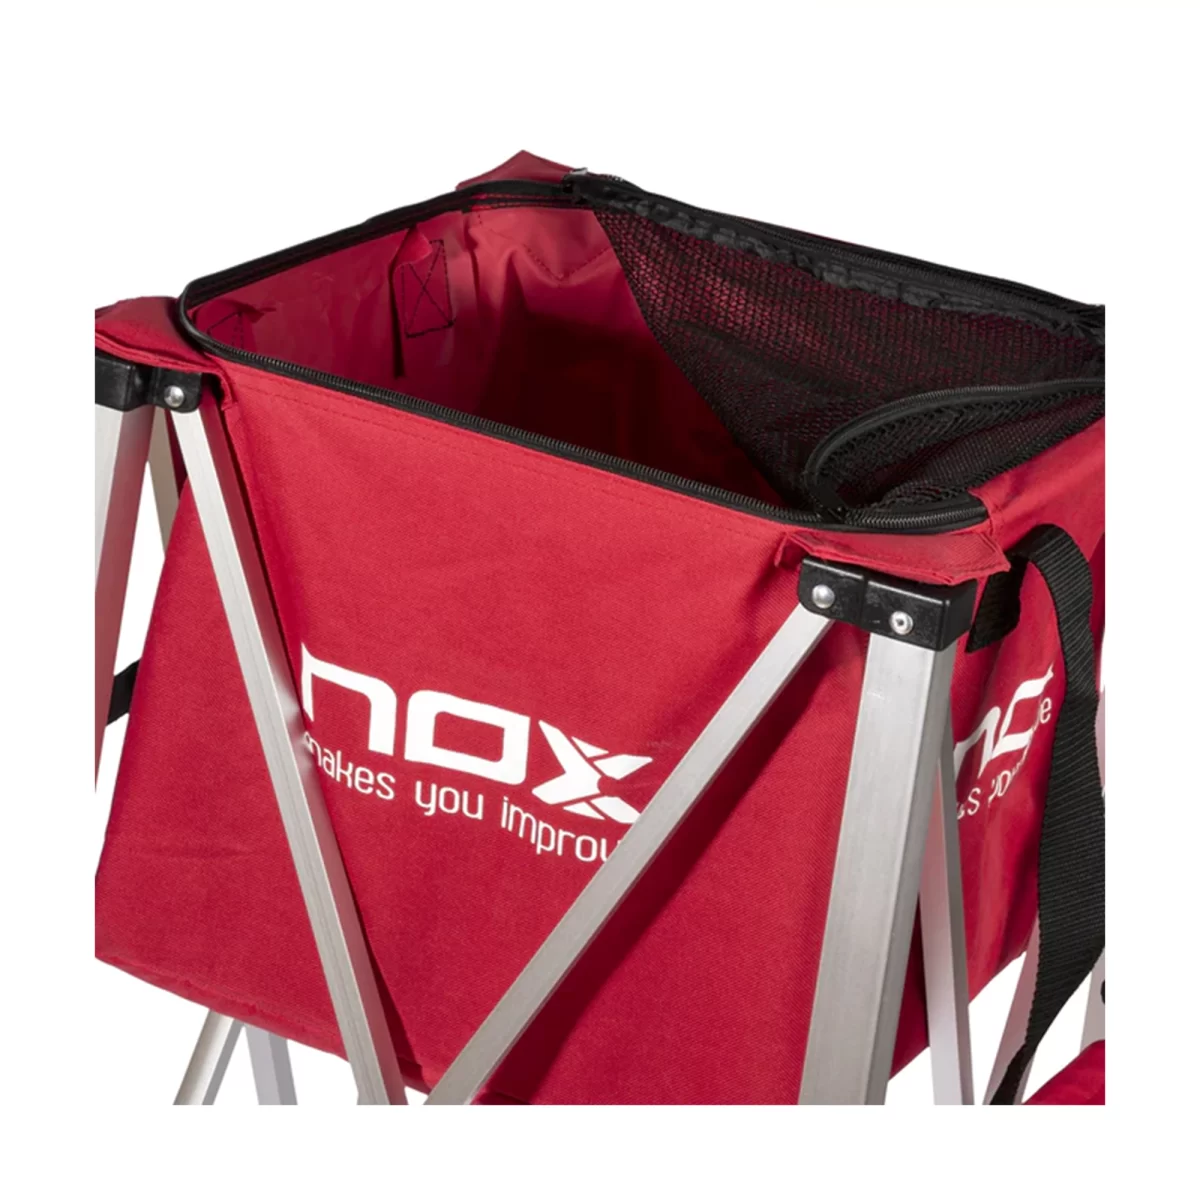 NOX FOLDABLE BASKET WITH WHEELS FOR BALLS